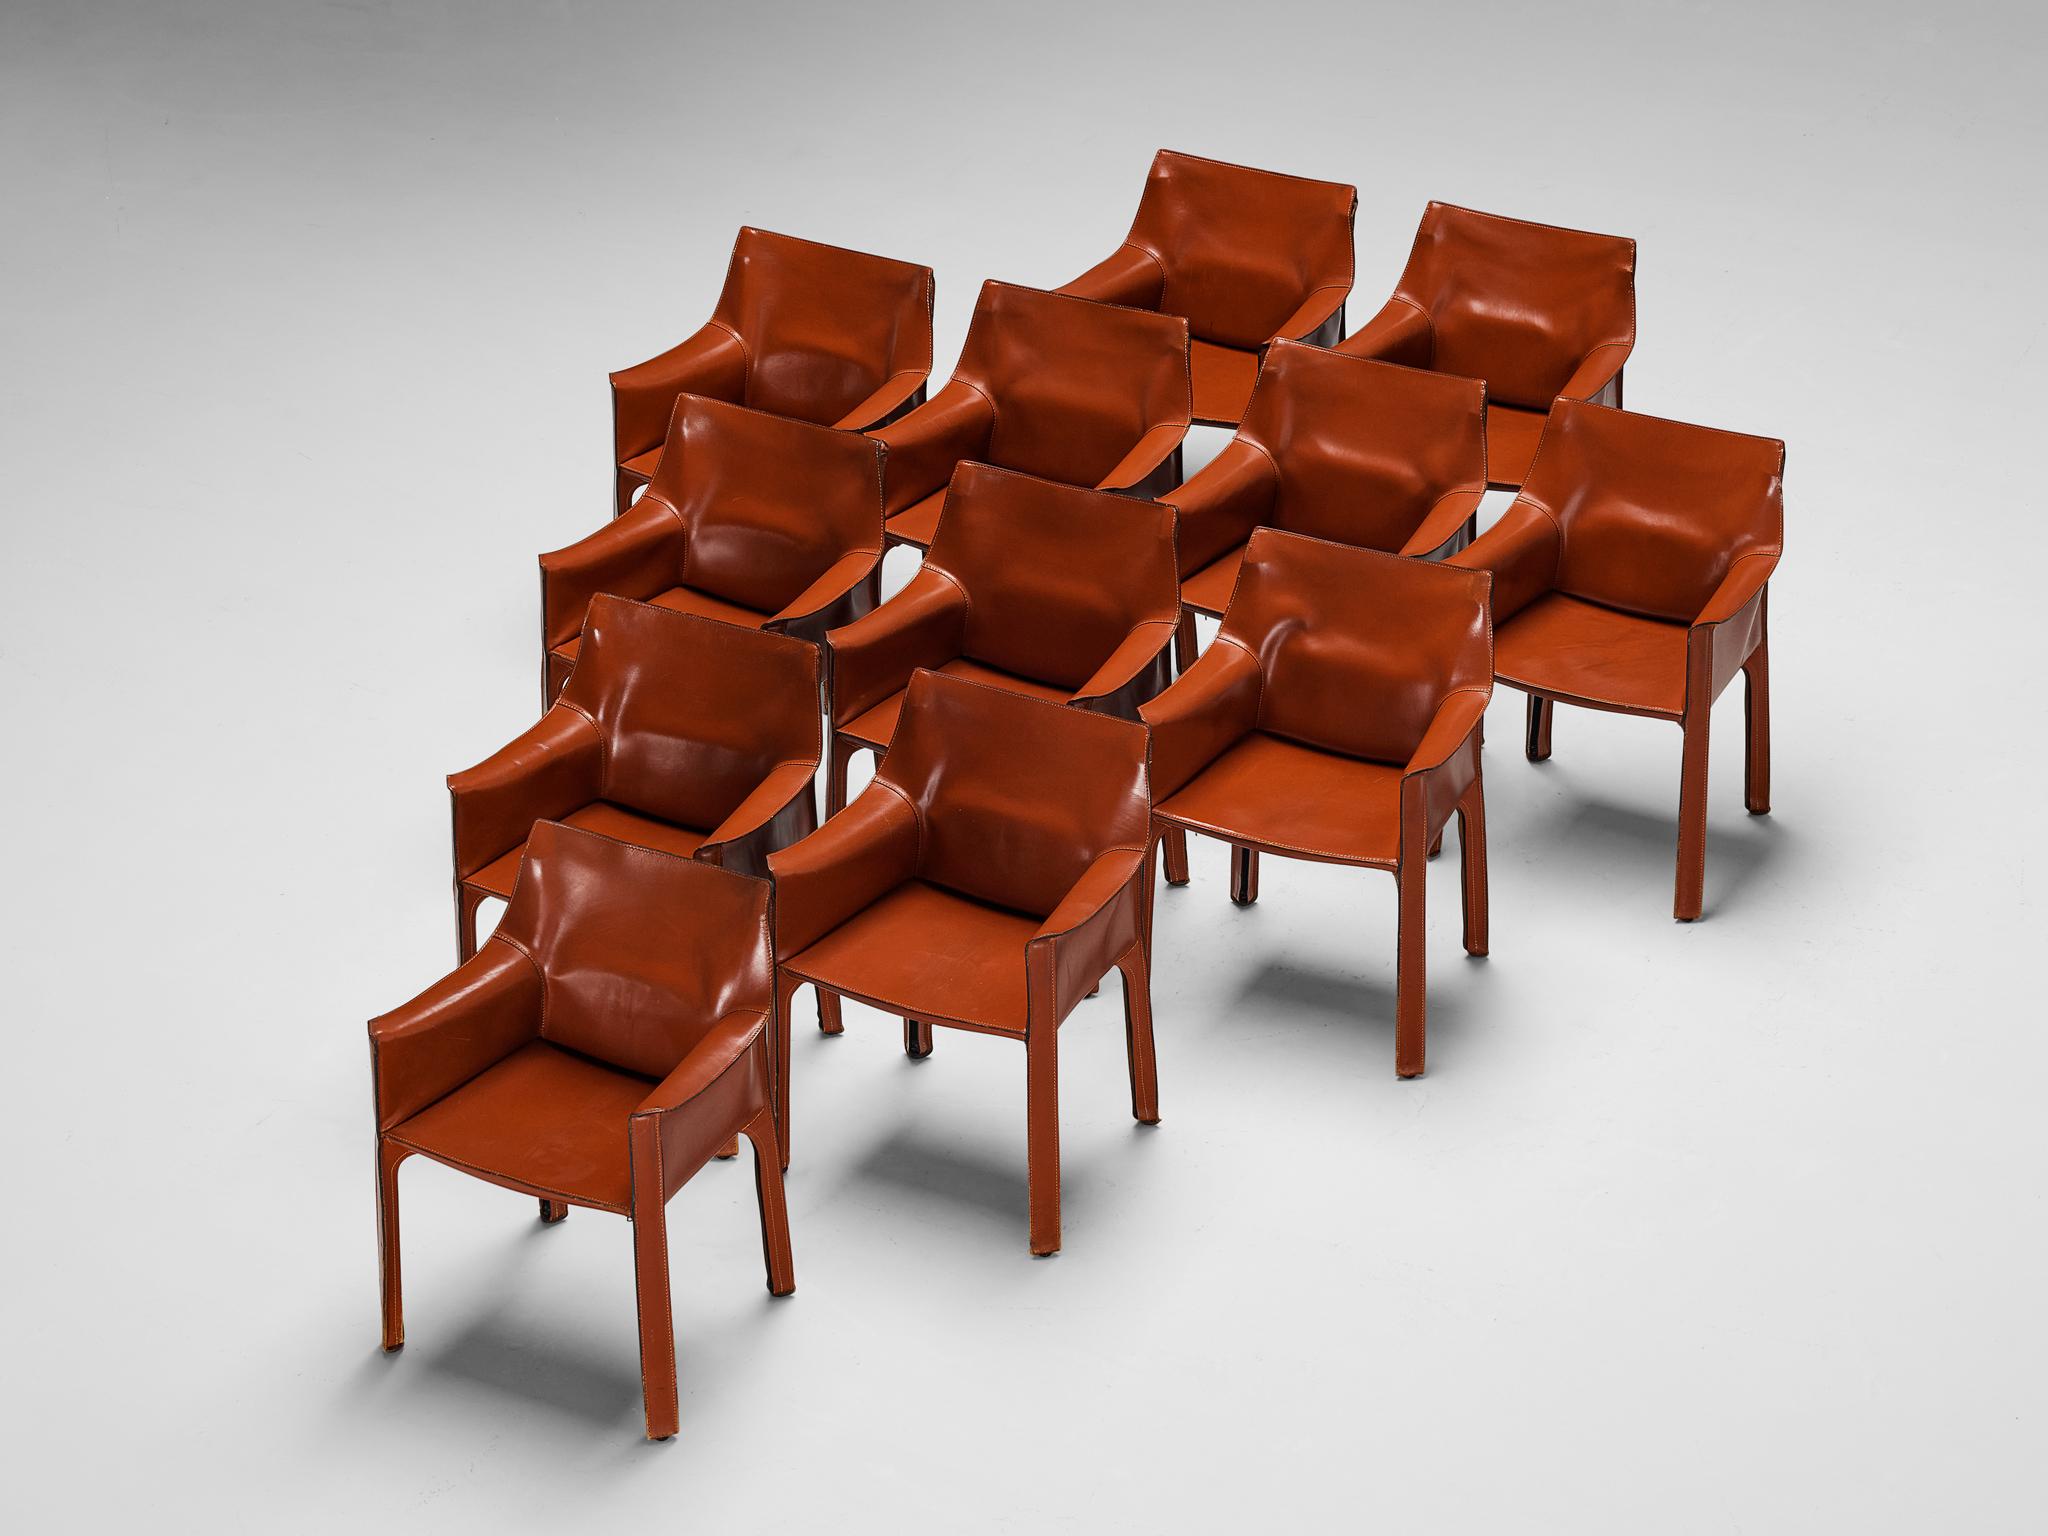 Mario Bellini for Cassina, armchairs model 'CAB 413', leather, Italy, 1979

The iconic ‘CAB’ chairs were designed by Mario Bellini in 1979. Conceptually new was the way Bellini uses leather to cover the whole chair in one monochrome layer. The red